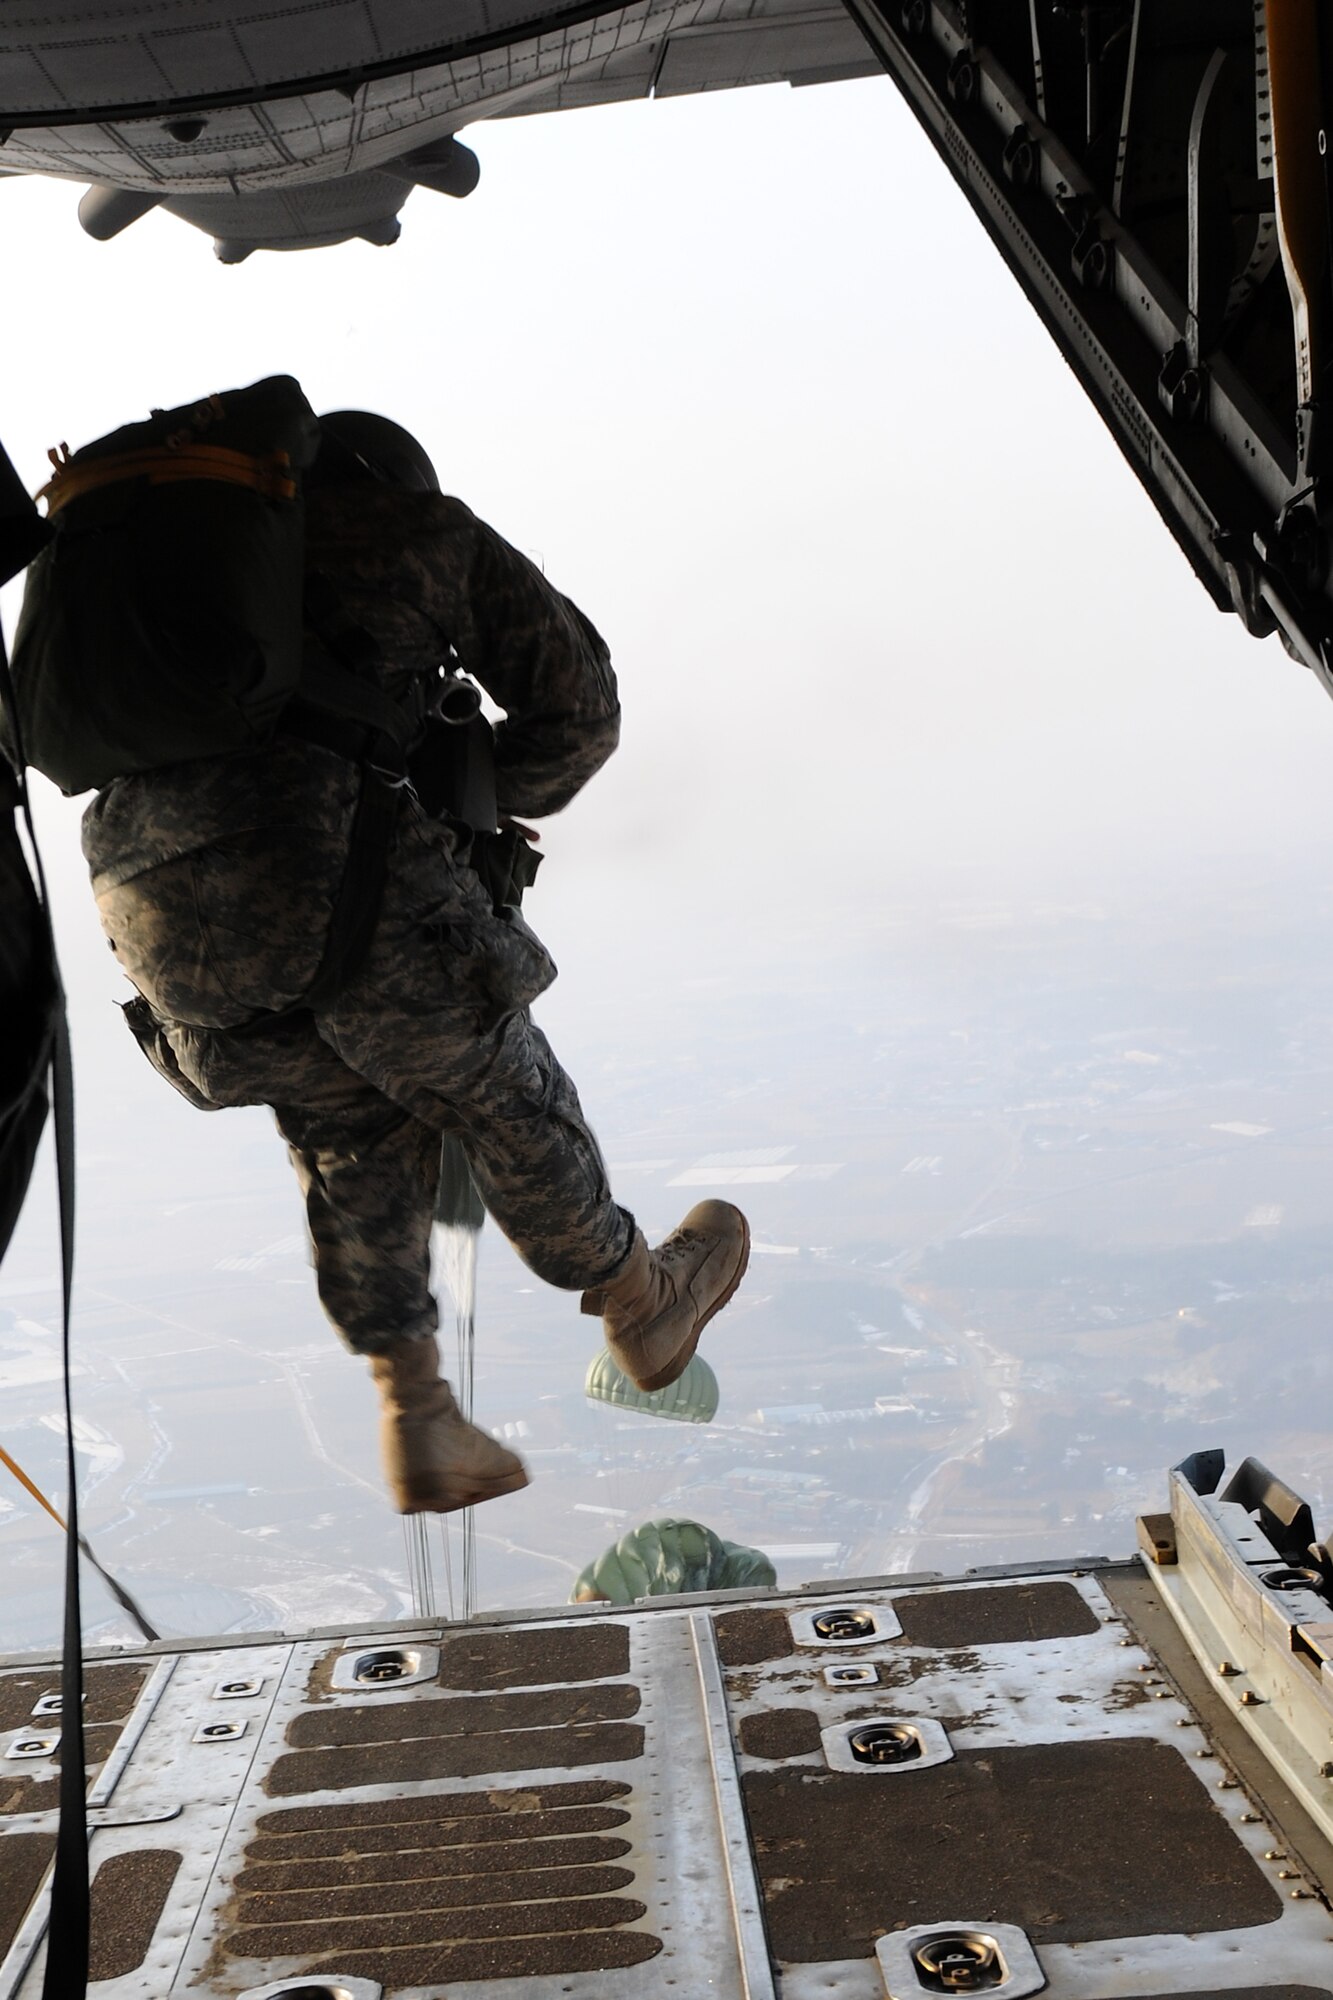 KUNSAN AIR BASE, Republic of Korea -- An Army member from the Special Operations Command Korea's 39th Special Forces Detachment performs static-line jump training from 1,250 feet out of a C-130 from Yokota Air Base, Japan, Feb. 1. The joint training flight also included Tech. Sgt. Troy Daland, 8th Operations Support Squadron NCO in charge of weapons, tactics and personnel recovery. The Air Force and SOCKOR frequently conduct aerial training missions to keep special operations forces members up to date with their training requirements. (U.S. Air Force photo/Tech. Sgt. Jonathan Pomeroy)   